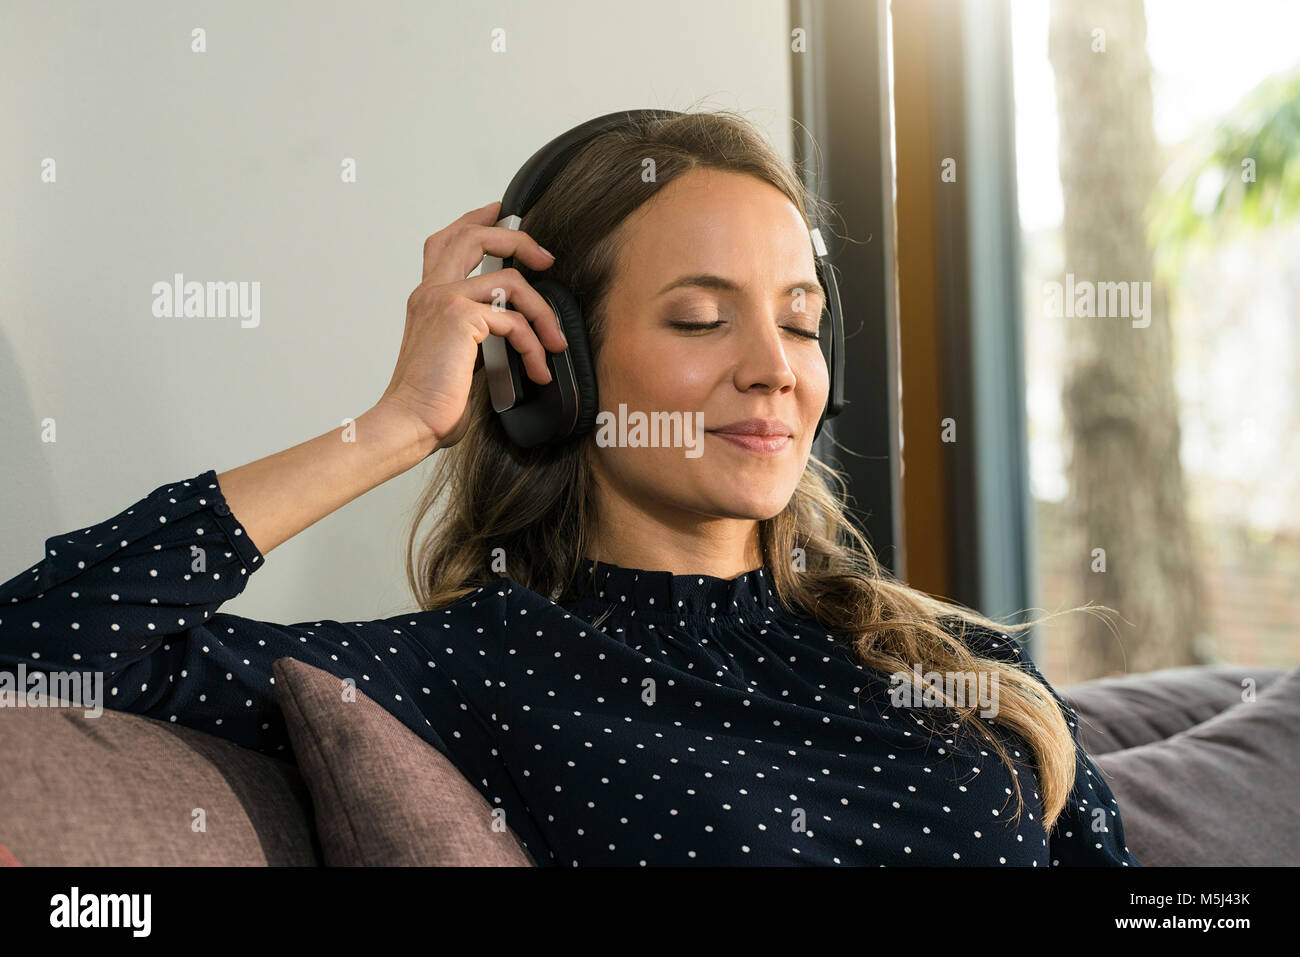 Portrait of smiling woman with headphones relaxing at home Banque D'Images